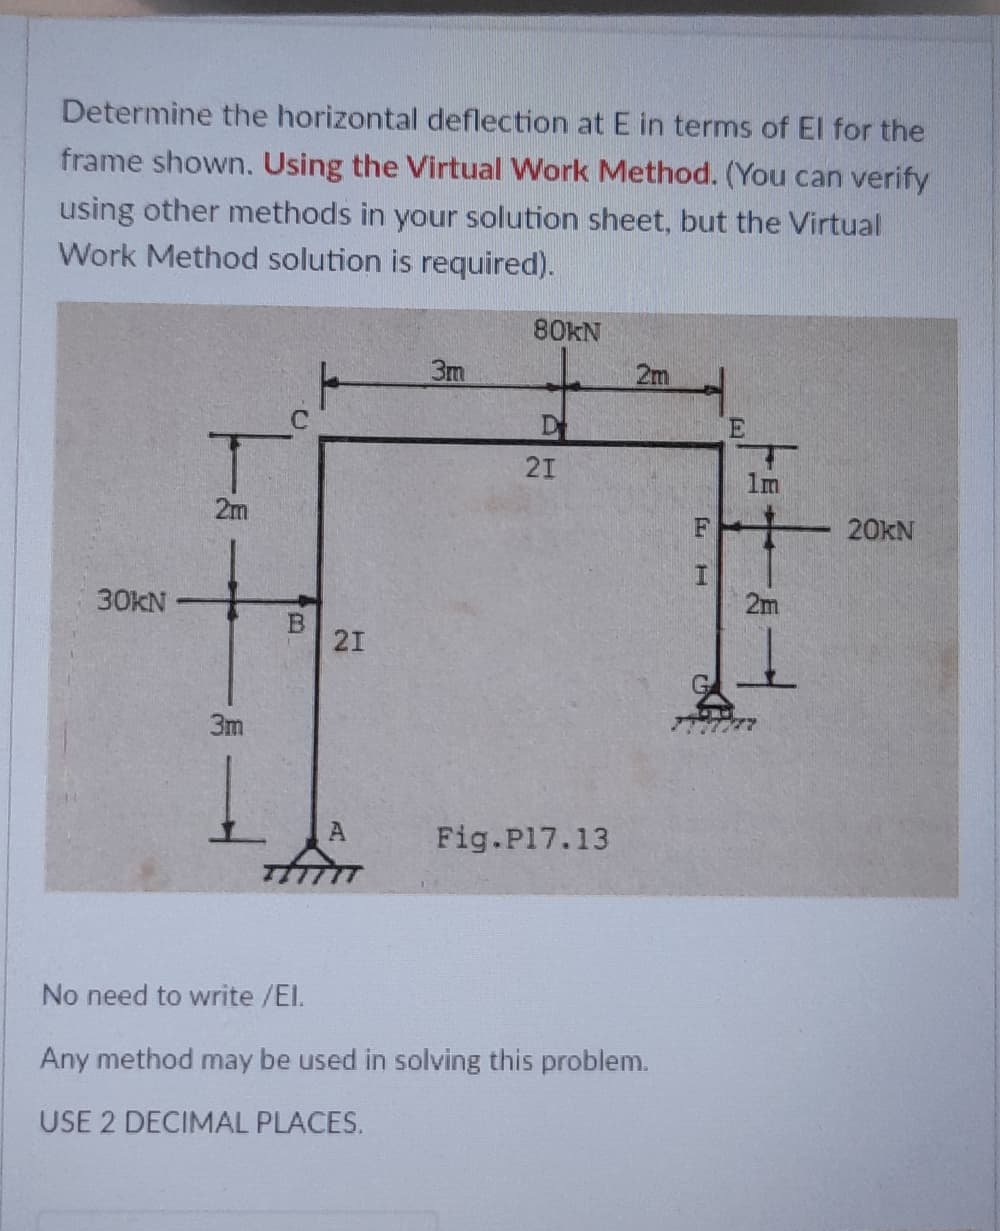 Determine the horizontal deflection at E in terms of El for the
frame shown. Using the Virtual Work Method. (You can verify
using other methods in your solution sheet, but the Virtual
Work Method solution is required).
80KN
3m
2m
E
21
1m
20KN
30KN
2m
21
3m
Fig.P17.13
No need to write /El.
Any method may be used in solving this problem.
USE 2 DECIMAL PLACES.
B.
